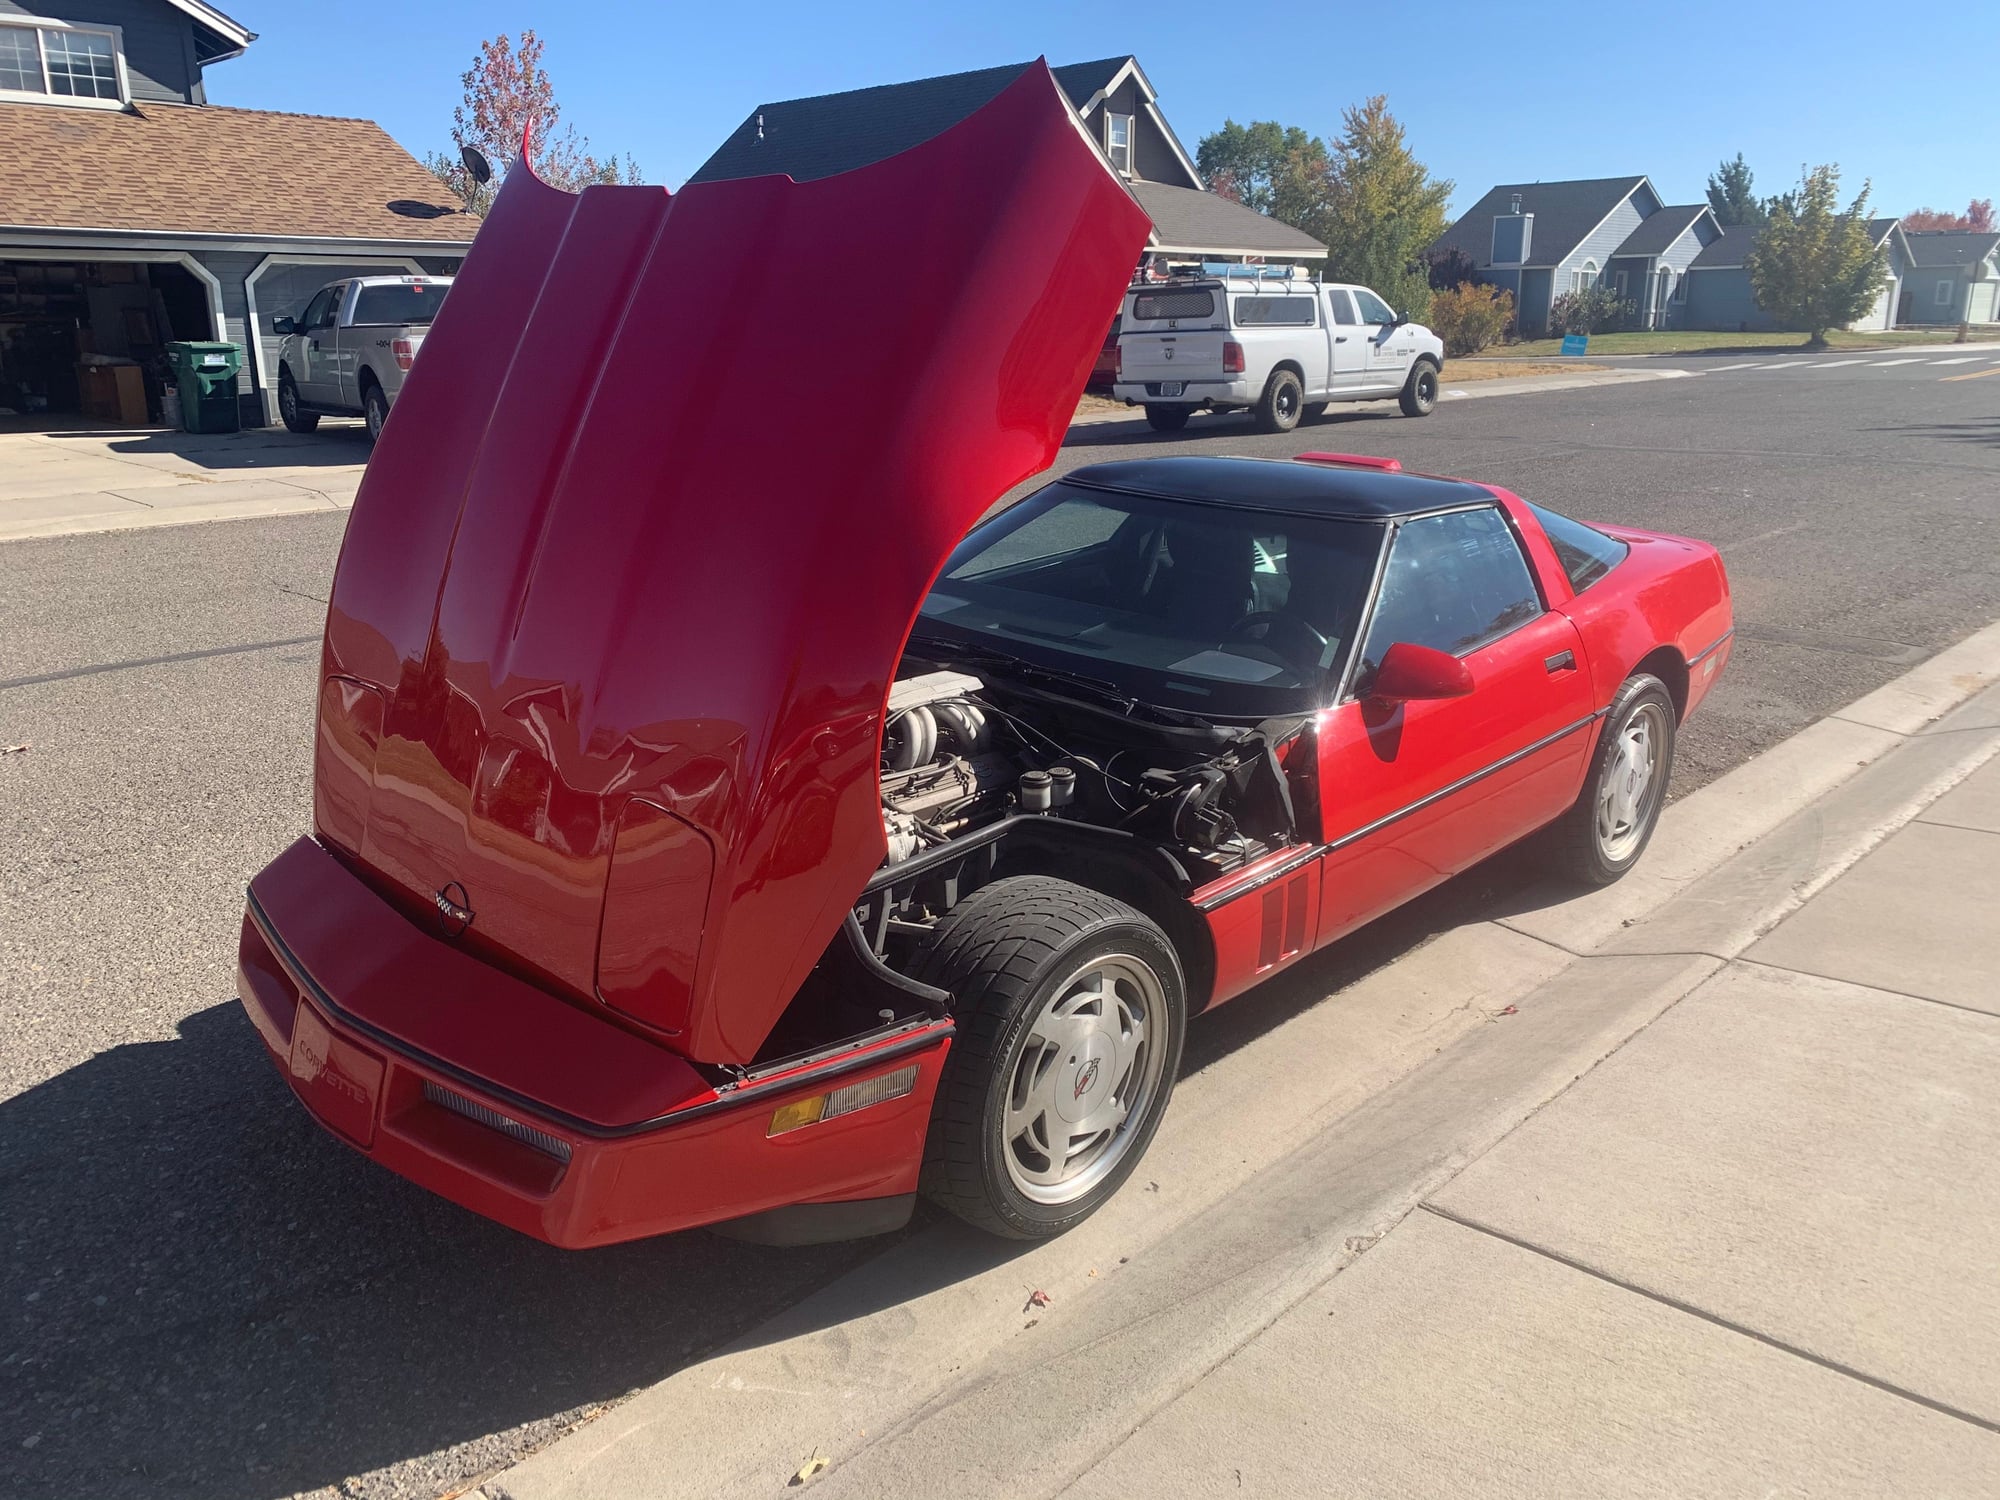 1989 Chevrolet Corvette - 1989 Chevy Corvette - Used - VIN 1G1YY2183K5106436 - 133,000 Miles - 8 cyl - 2WD - Automatic - Coupe - Red - Carson City, NV 89705, United States